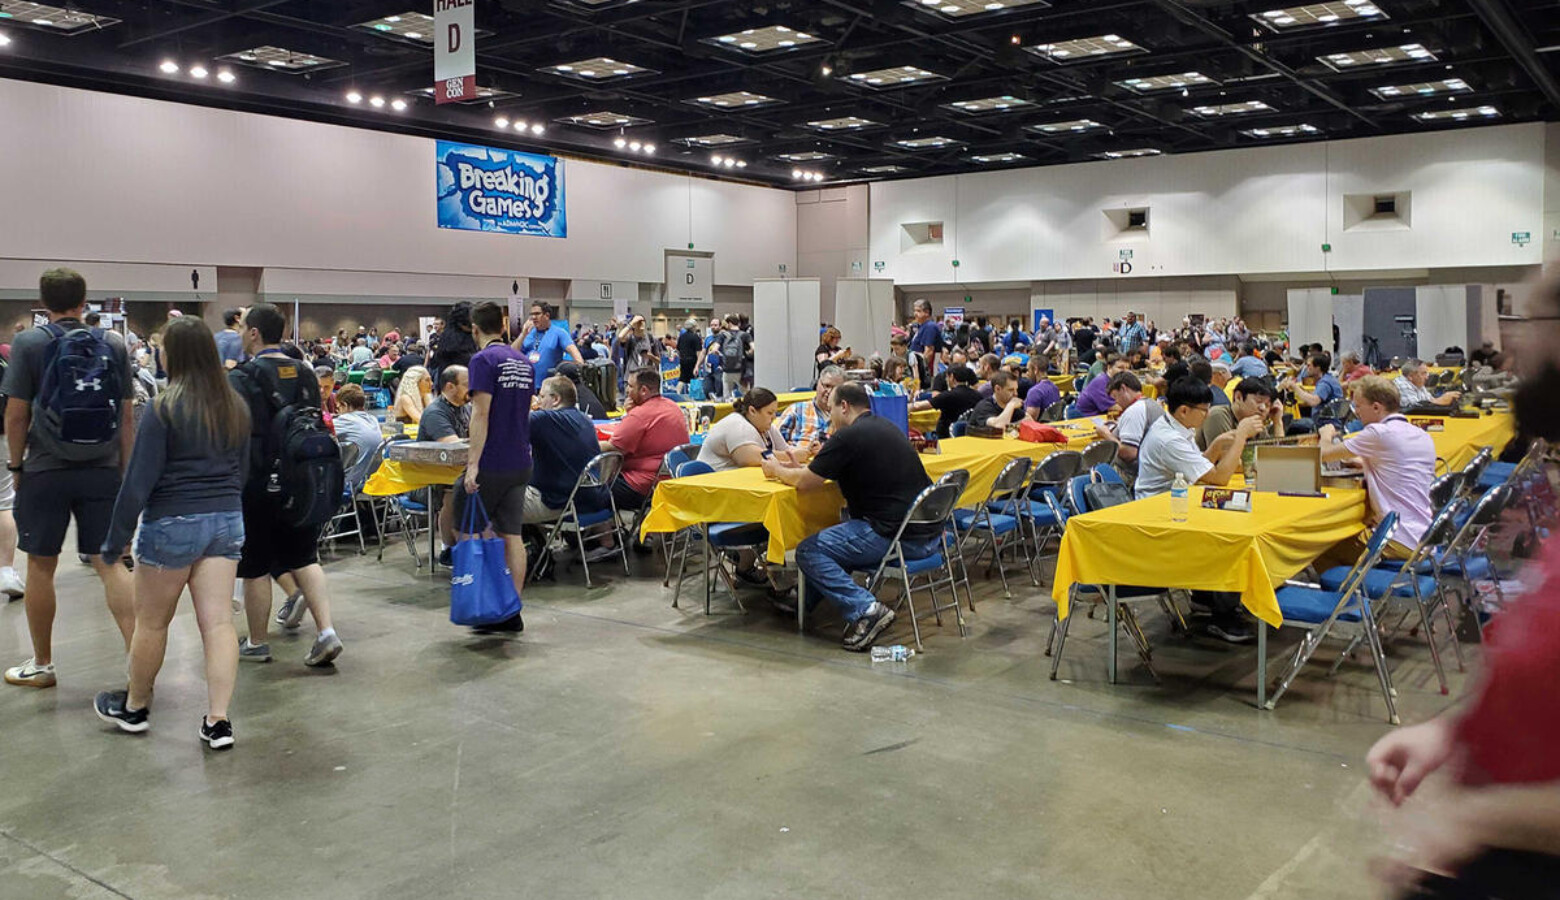 Attendees play games at the 2019 Gen Con in Indianapolis Saturday, Aug. 3. (Samantha Horton/IPB News)